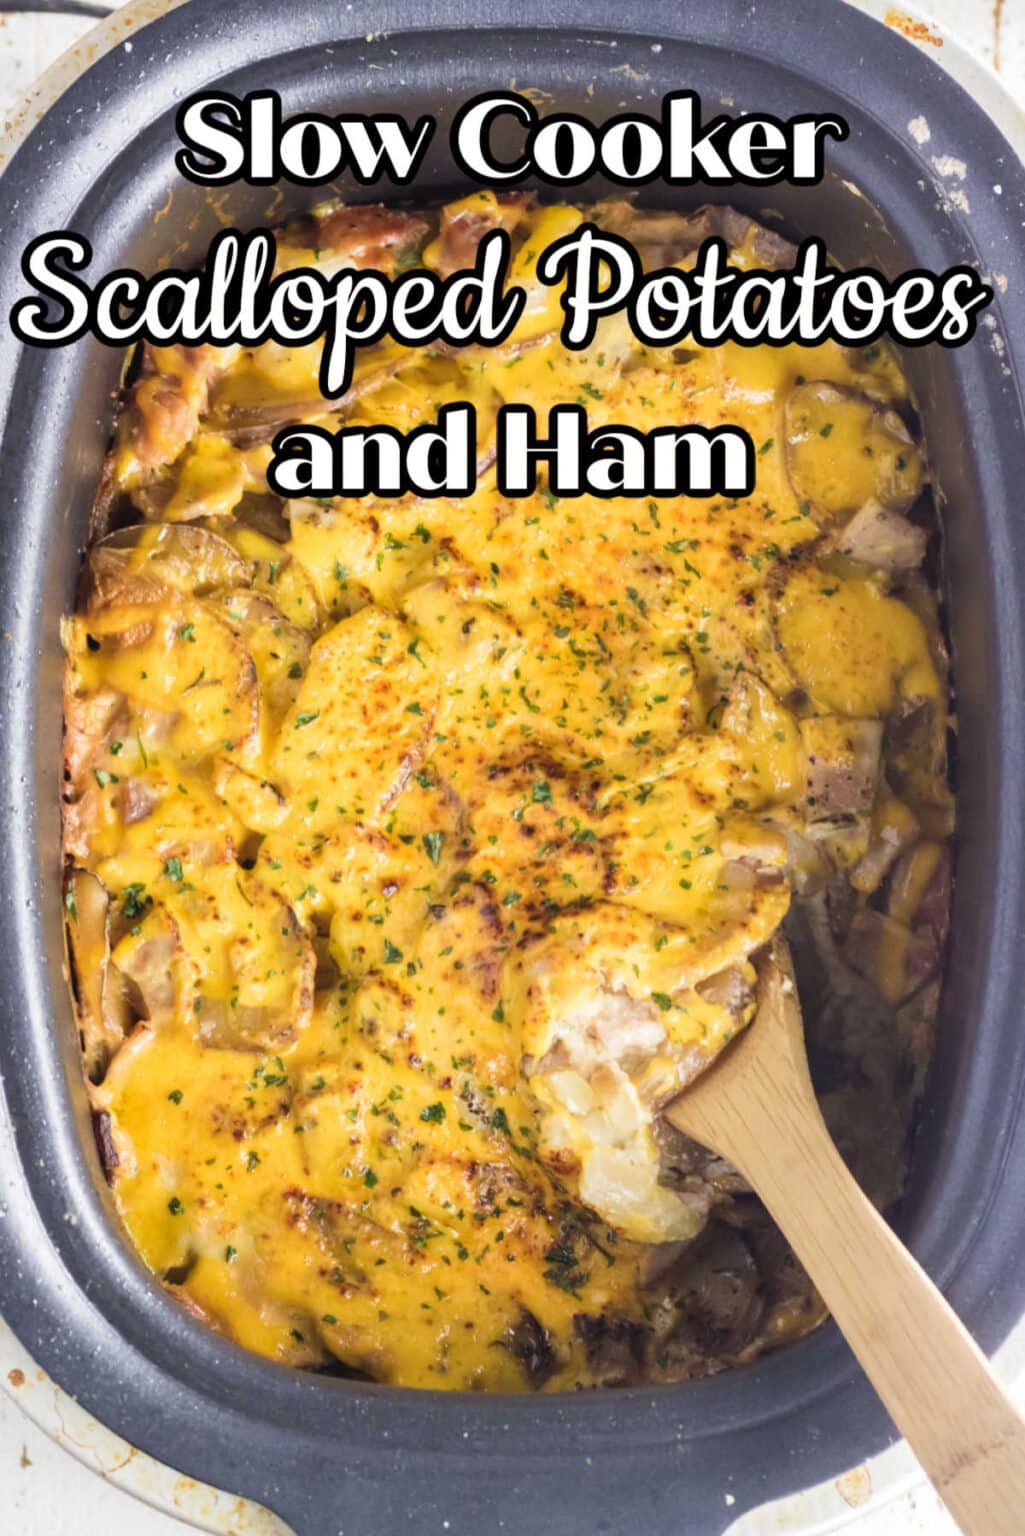 Slow Cooker Scalloped Potatoes and Ham - Restless Chipotle